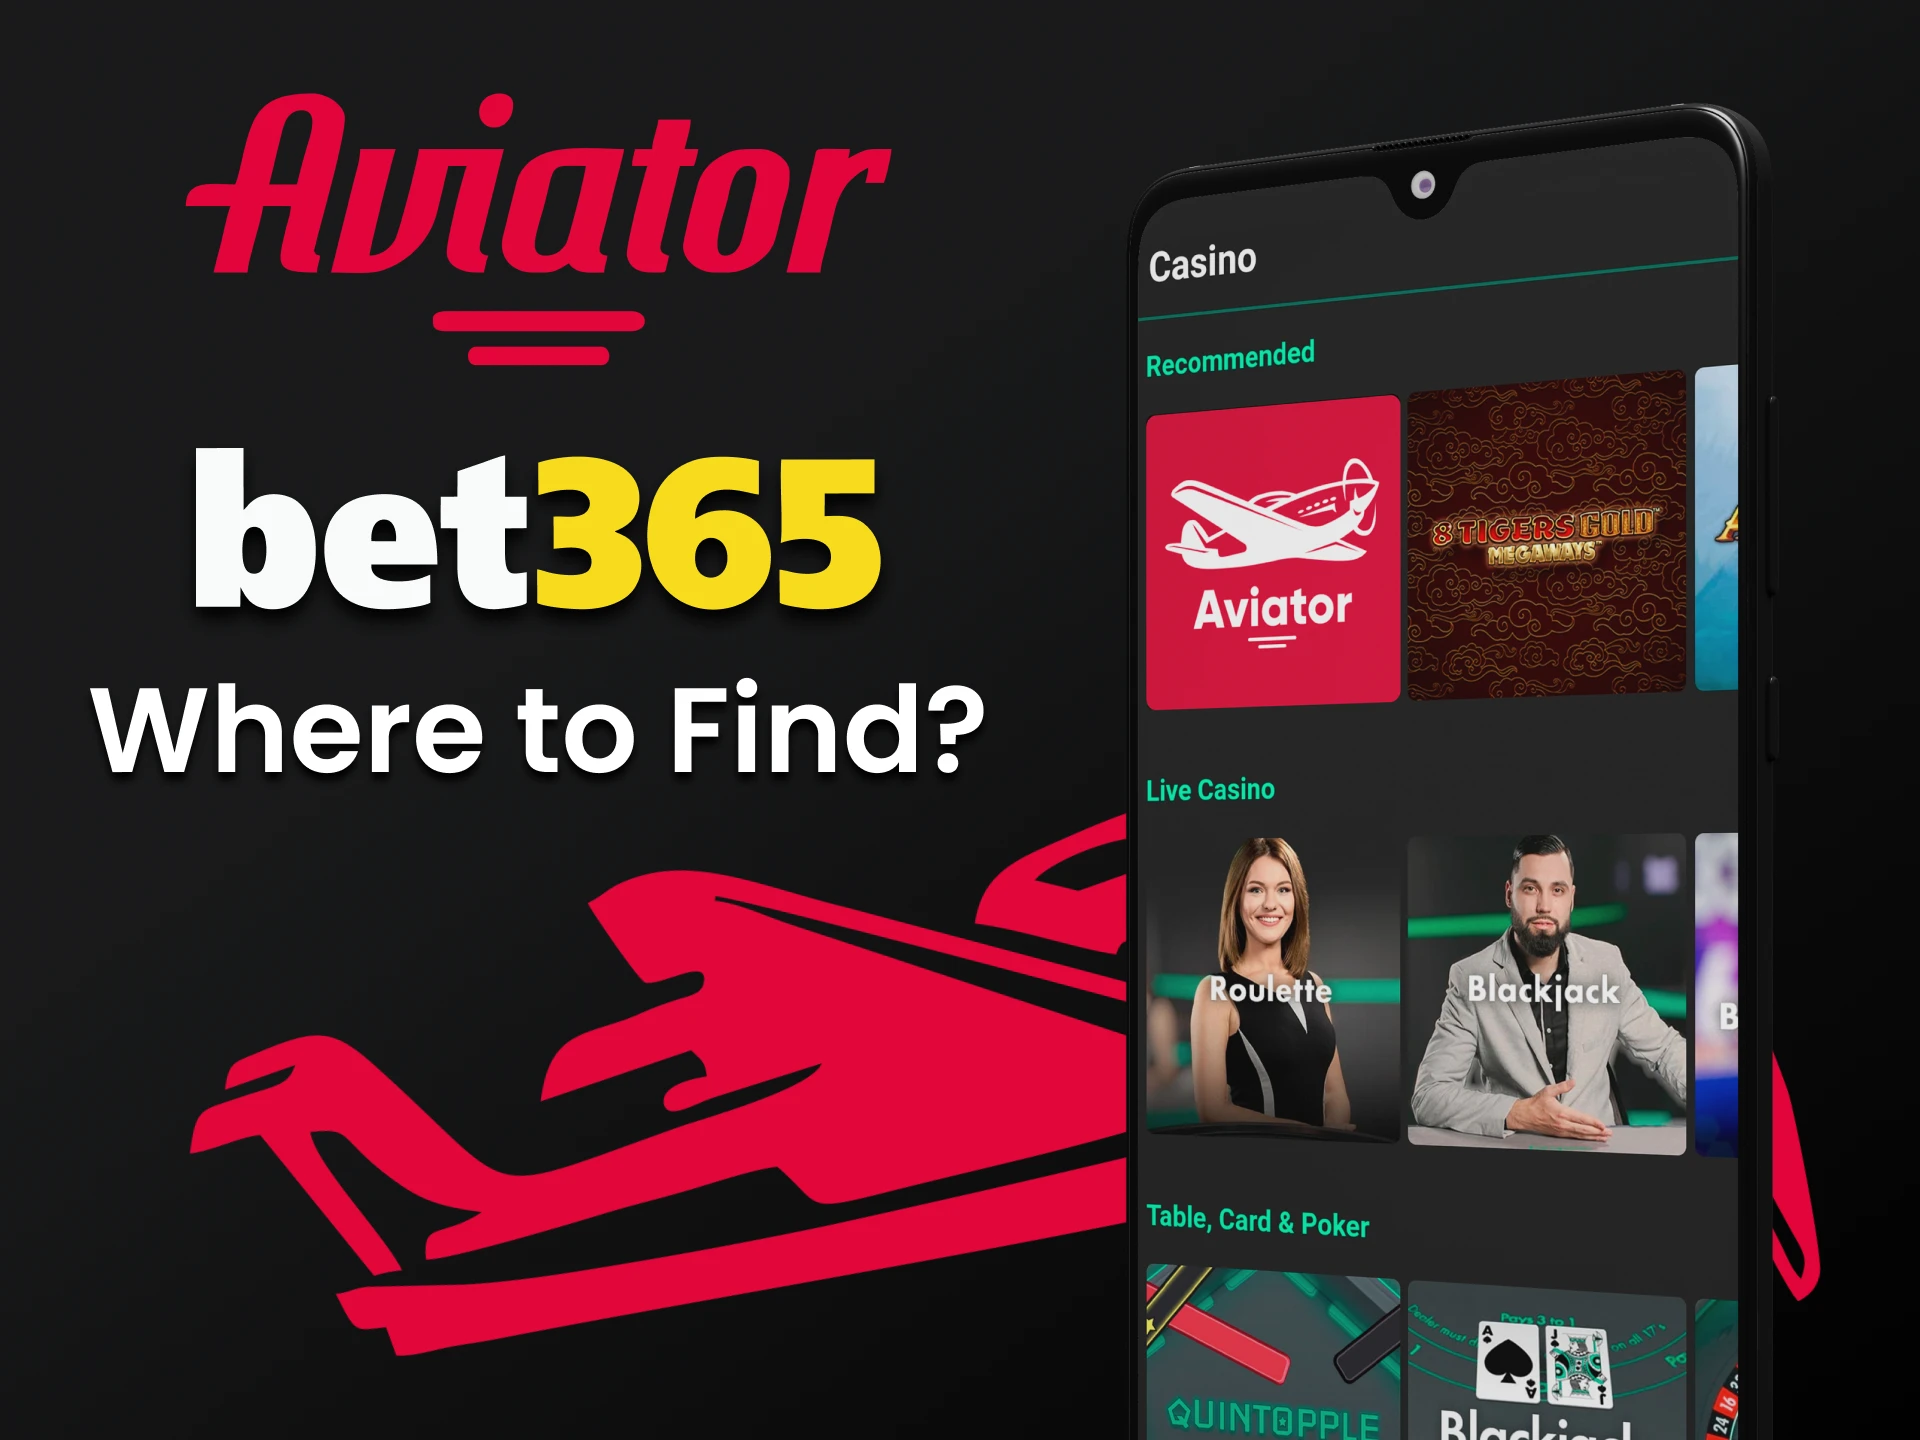 Go to the casino section of the Bet365 application to play Aviator.